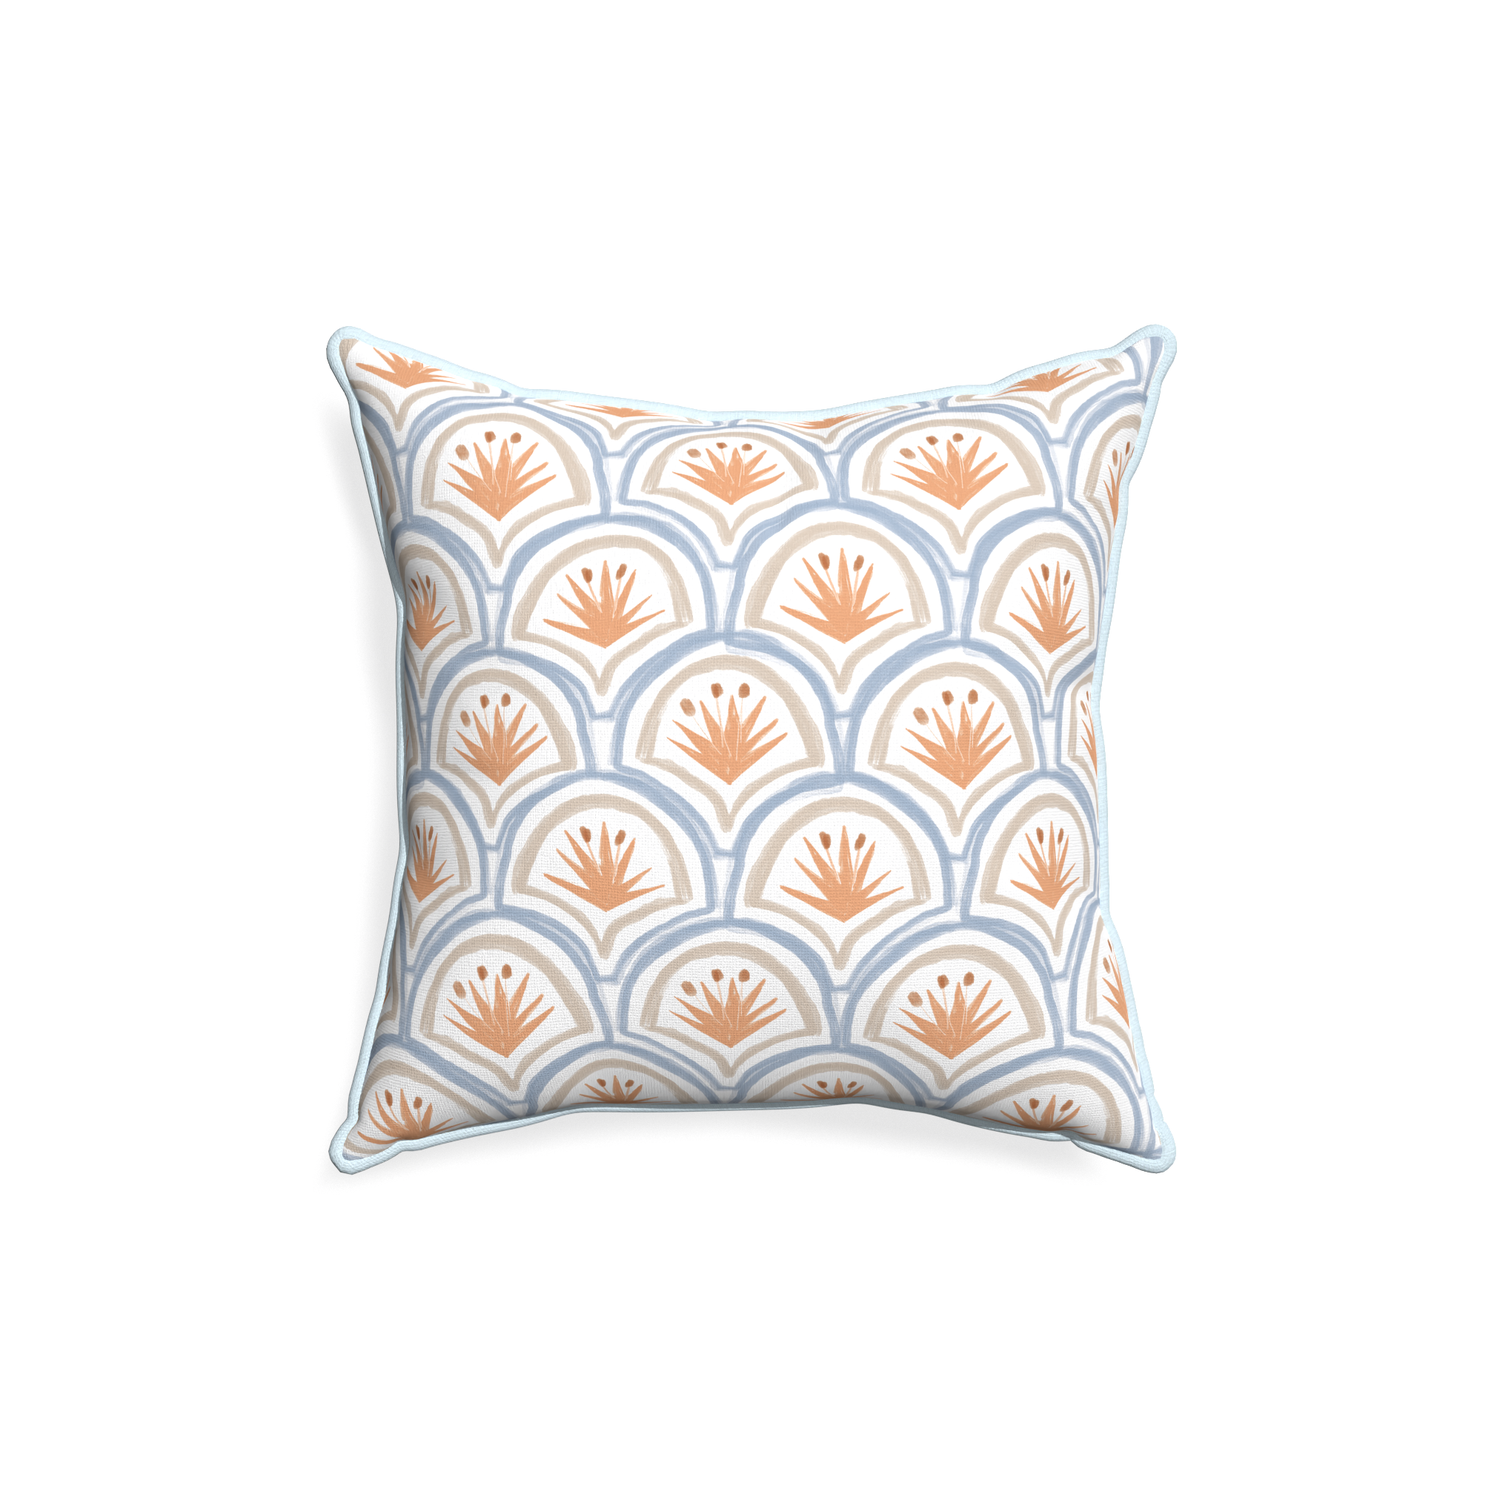 18-square thatcher apricot custom art deco palm patternpillow with powder piping on white background